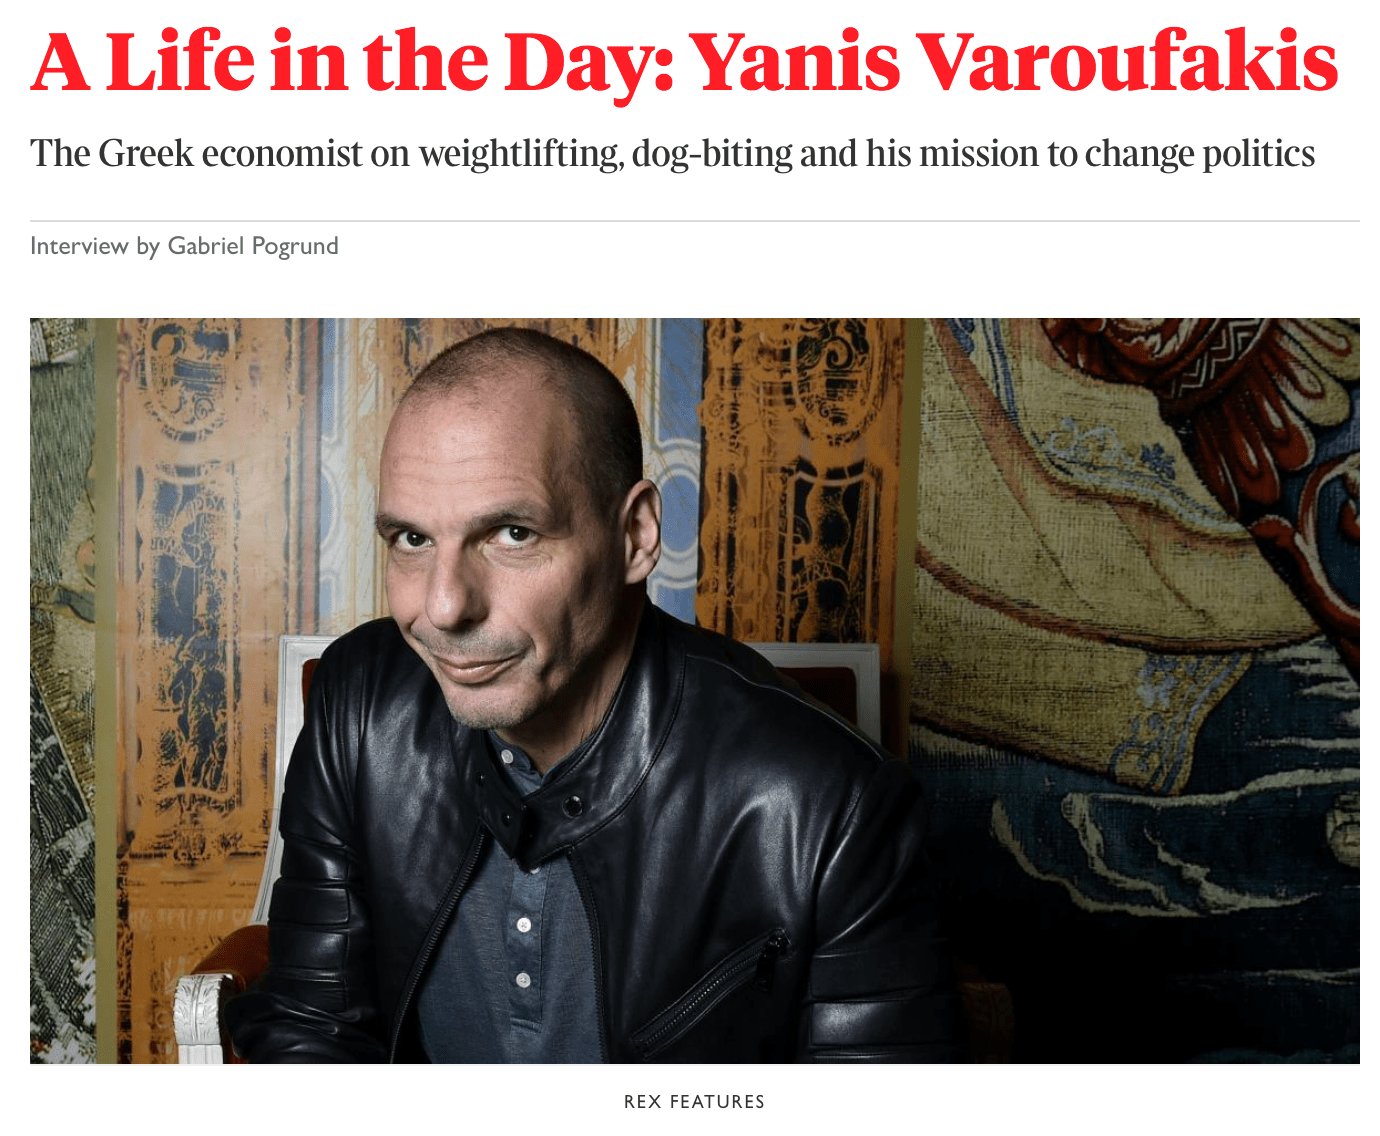 A Life in the Day – Sunday Times, 26th November 2017